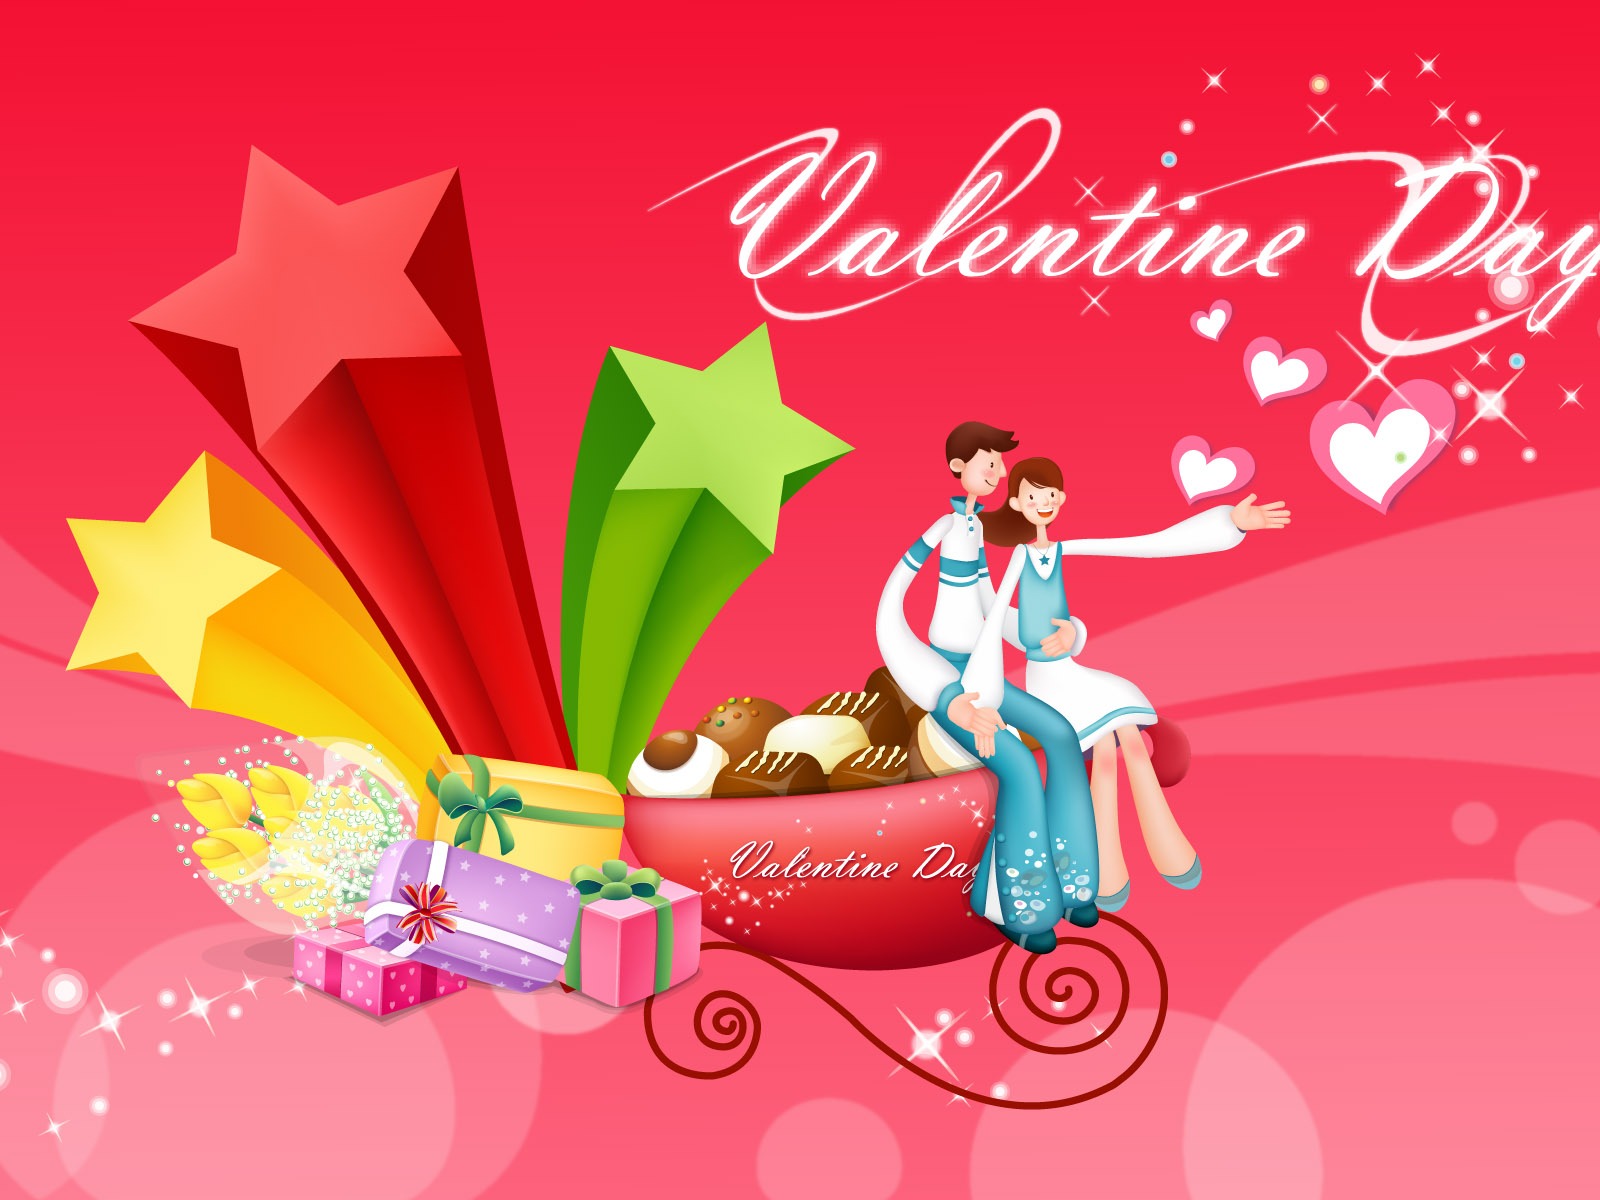 Valentine's Day Theme Wallpapers (2) #1 - 1600x1200